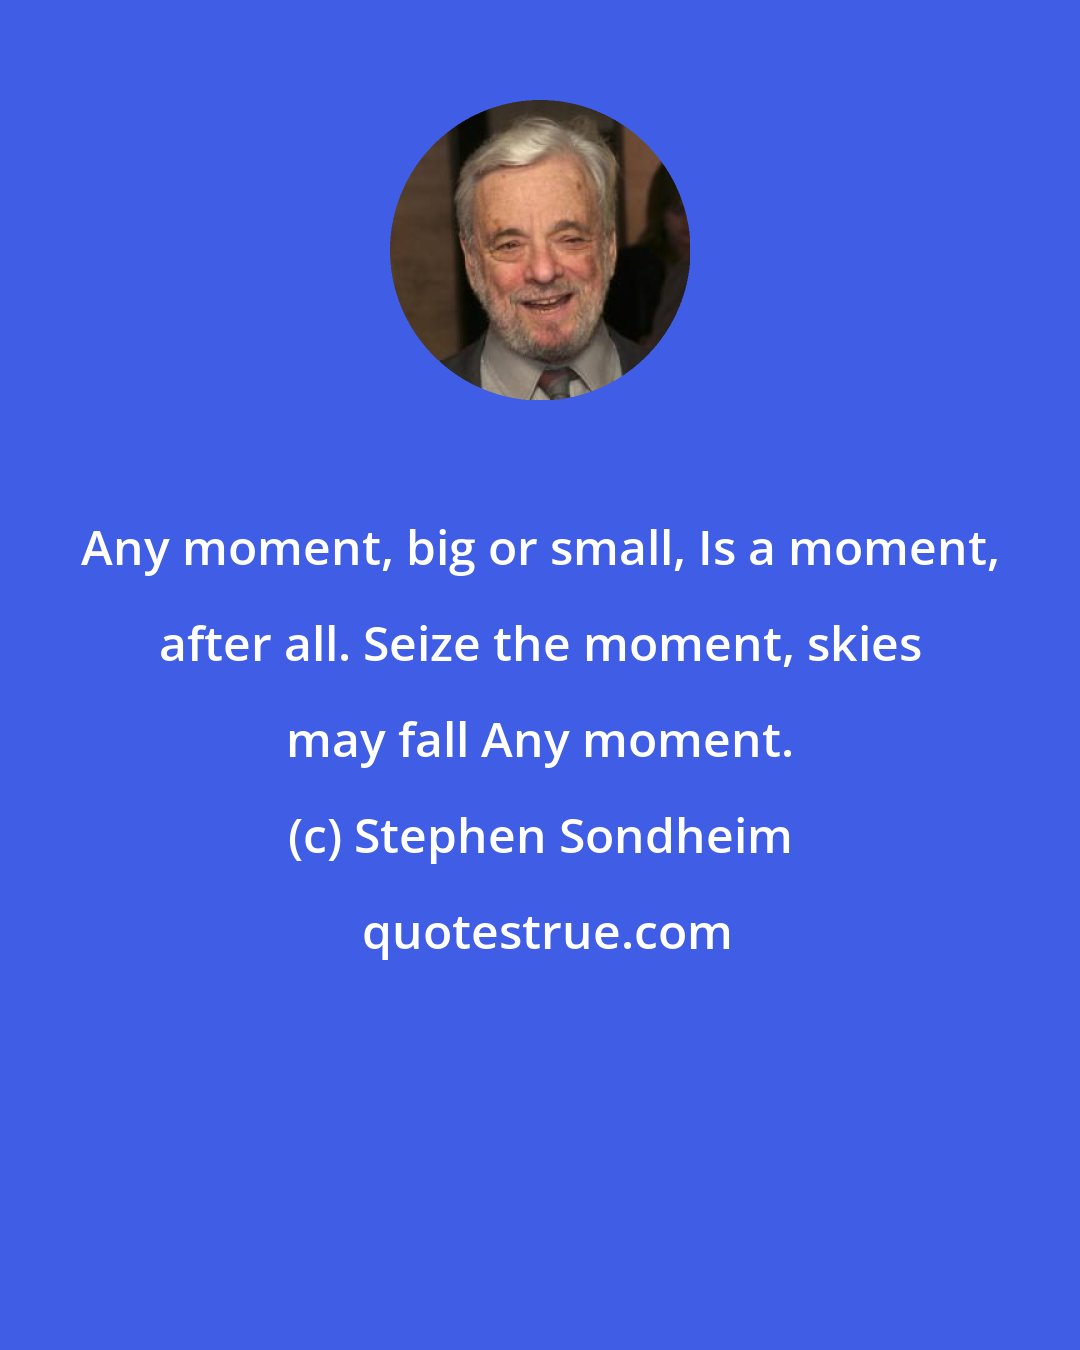 Stephen Sondheim: Any moment, big or small, Is a moment, after all. Seize the moment, skies may fall Any moment.